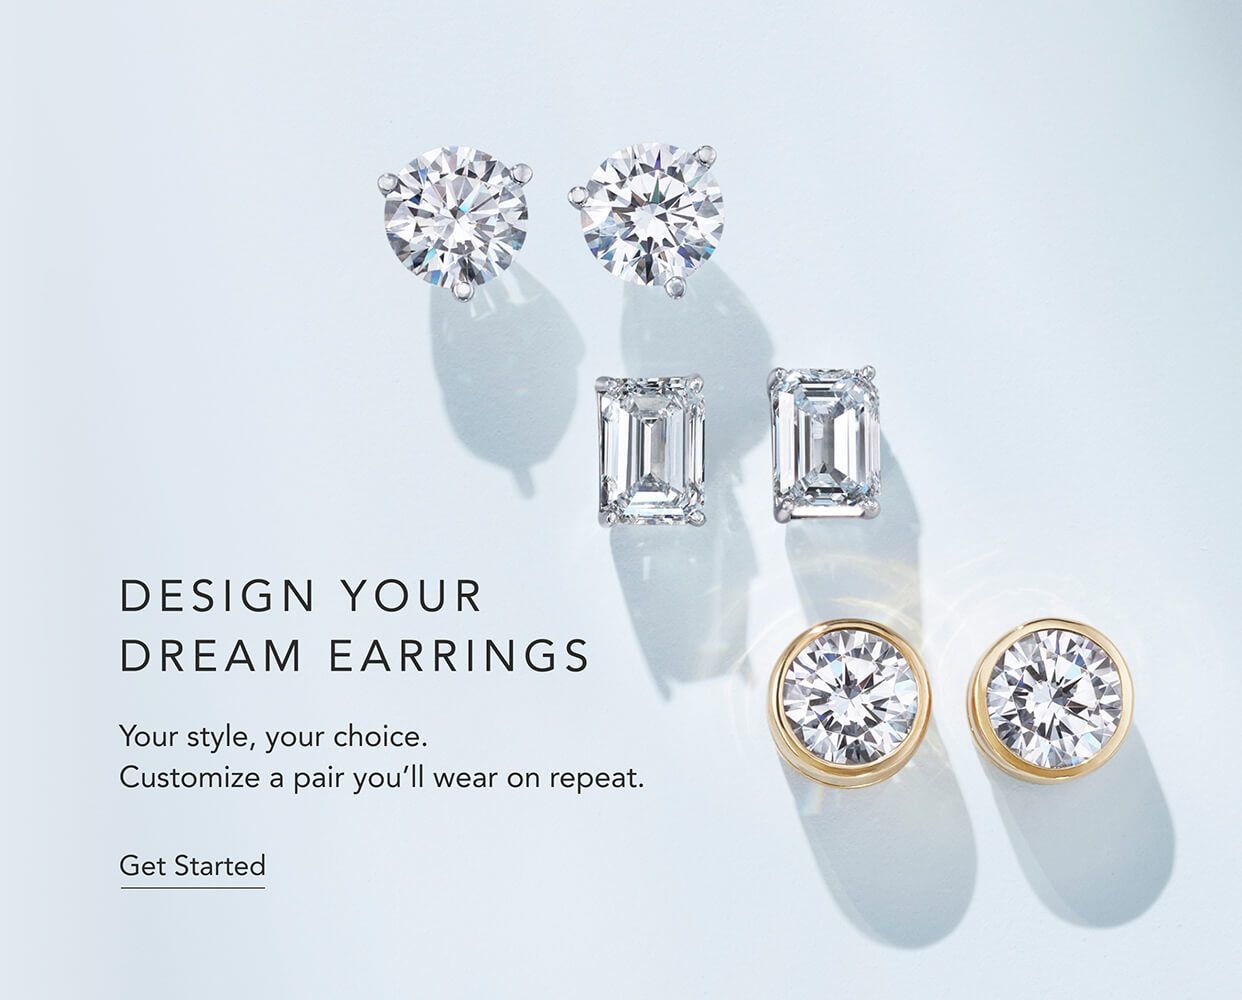 Men's Guide to Diamond Earrings | With Clarity